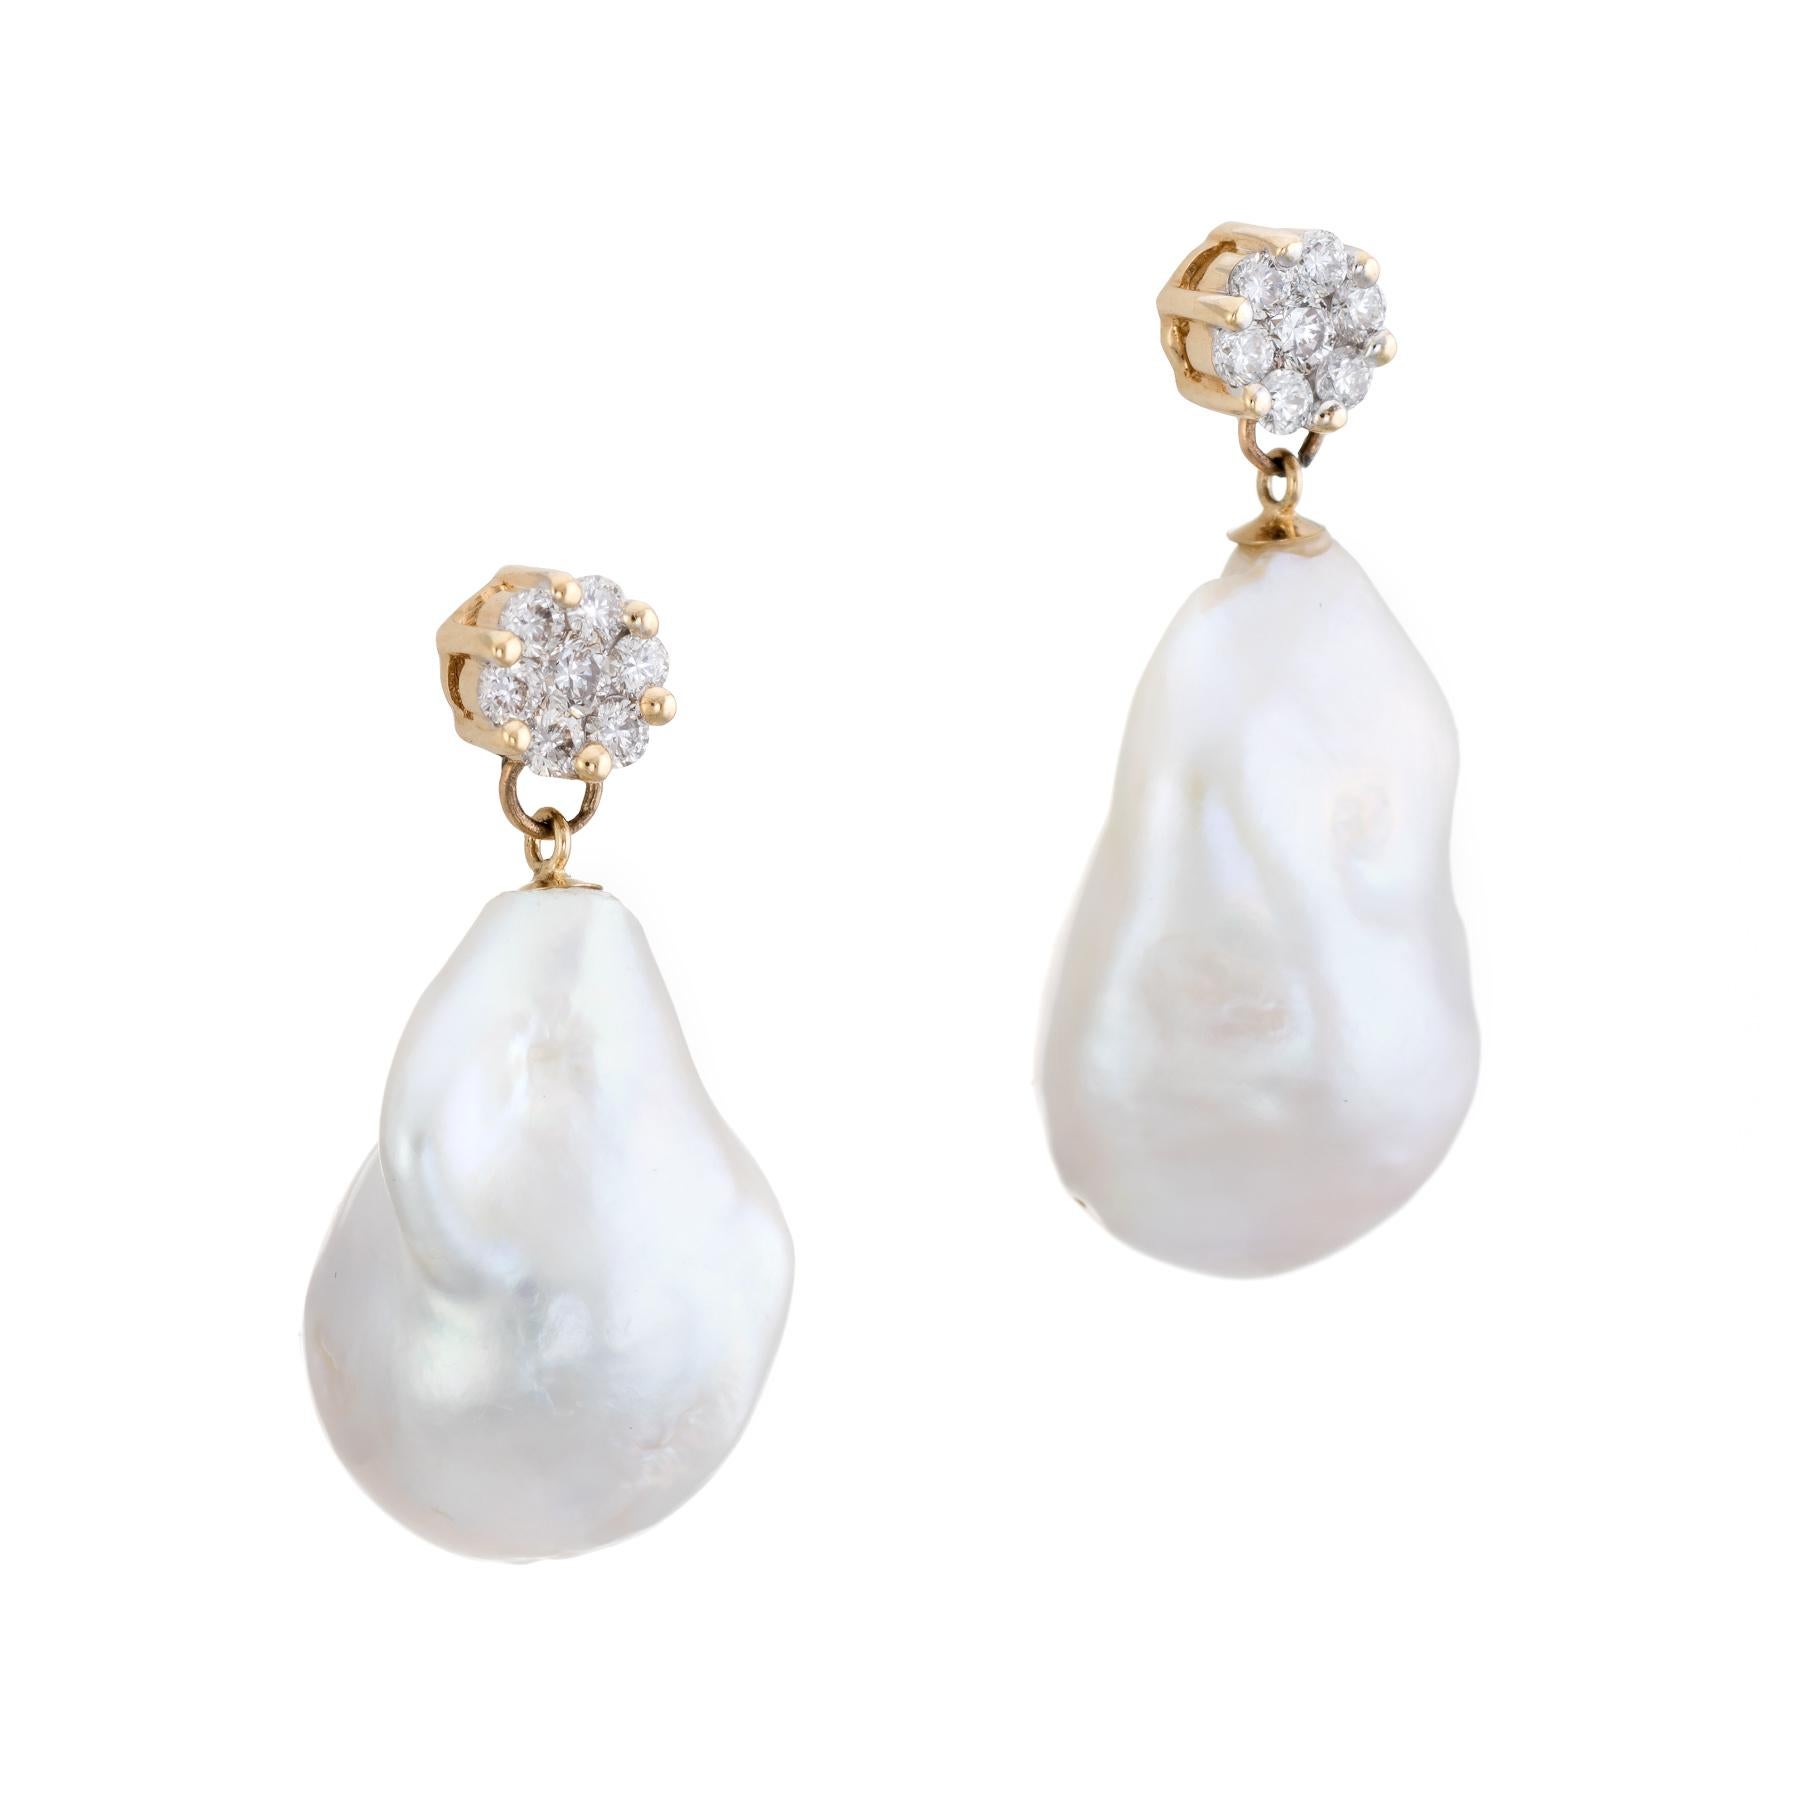 Elegant pair of Tahitian baroque pearl & diamond earrings, crafted in 14k yellow gold. 

Large irregular shaped Tahitian South Sea baroque pearls measure 22mm x 14mm and 20mm x 13.5mm. The pearls exhibit excellent luster with a rose overtone. Round